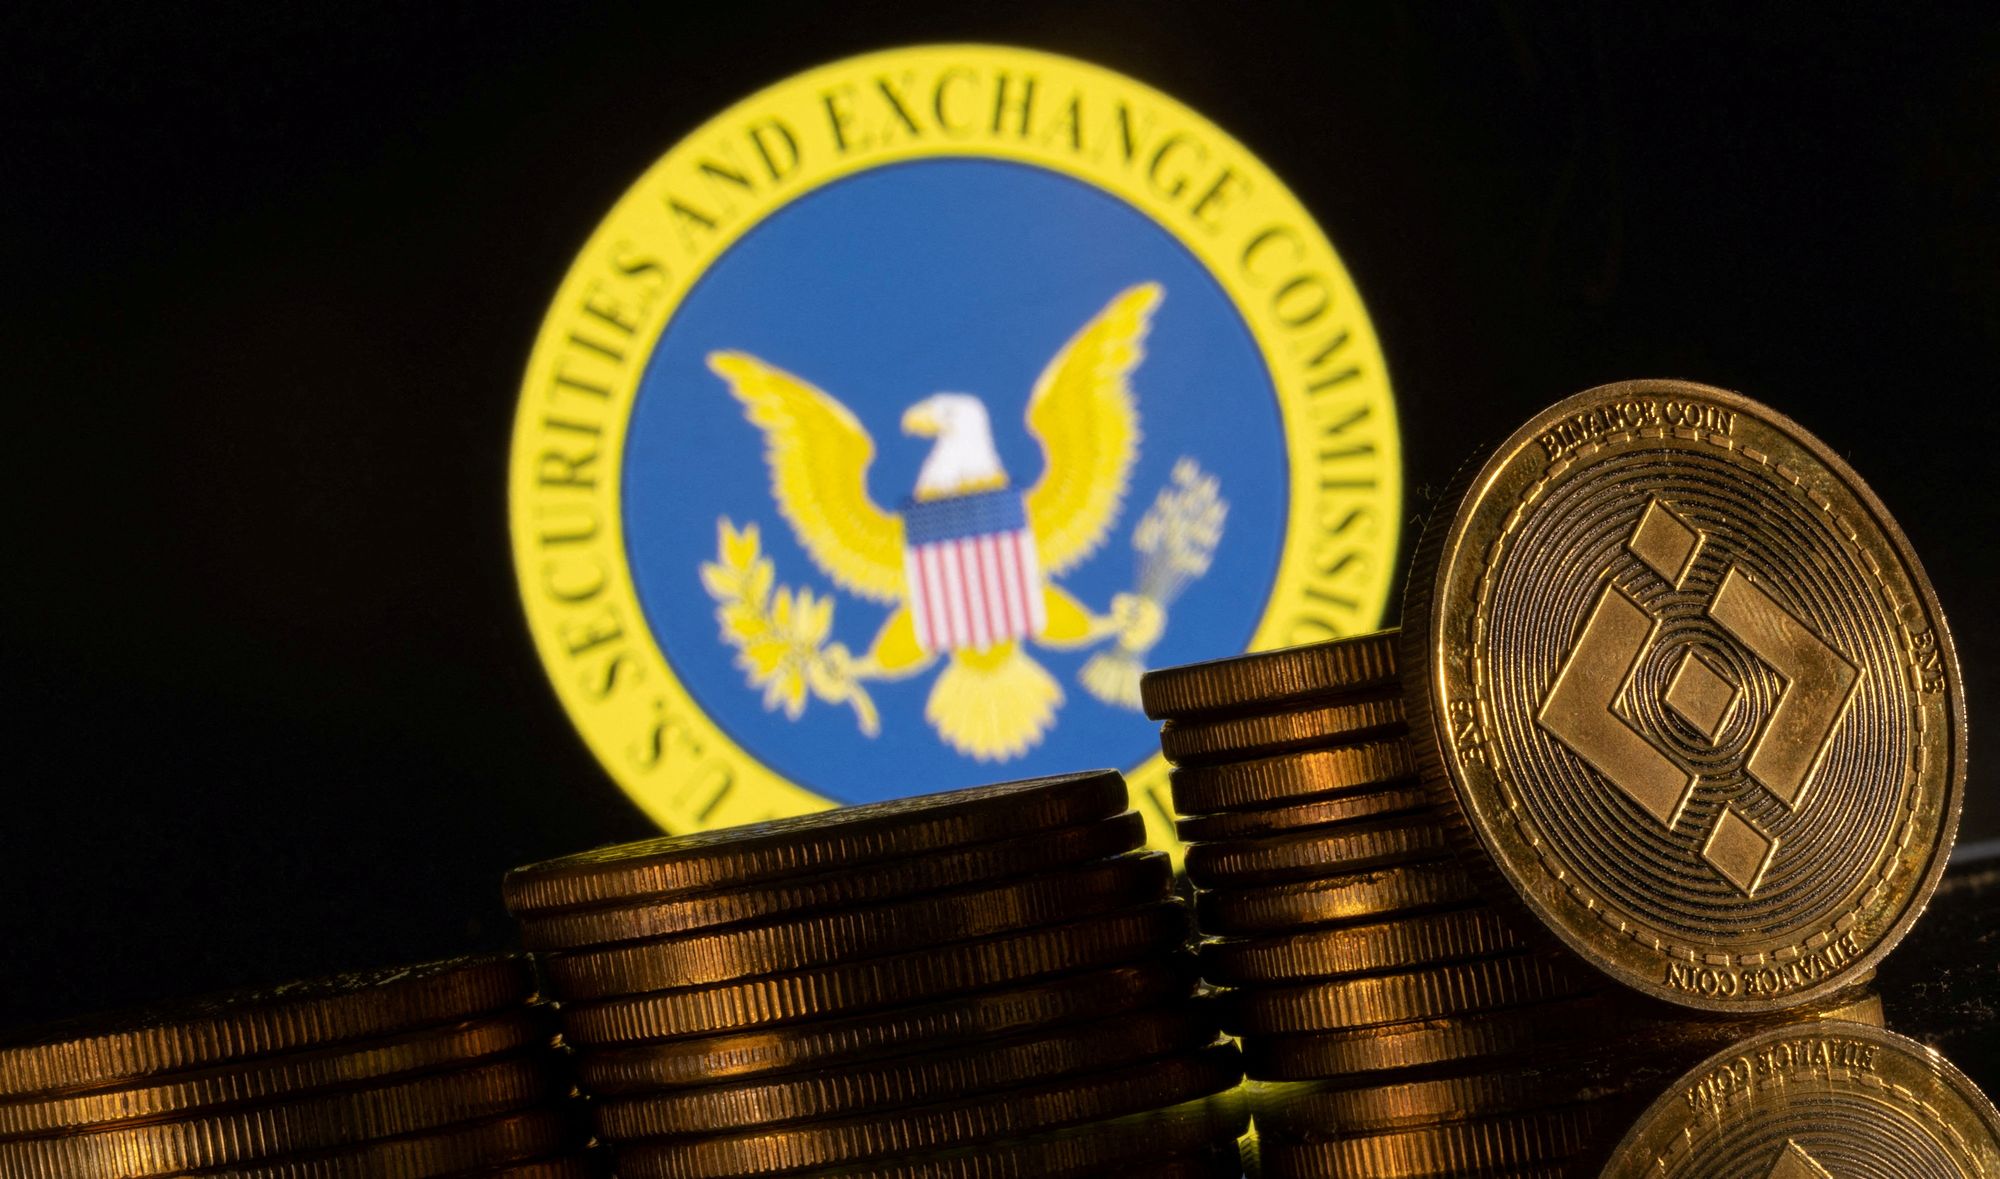 SEC Asks Court To Freeze Assets Of Binance U.S. Units Named In Suit